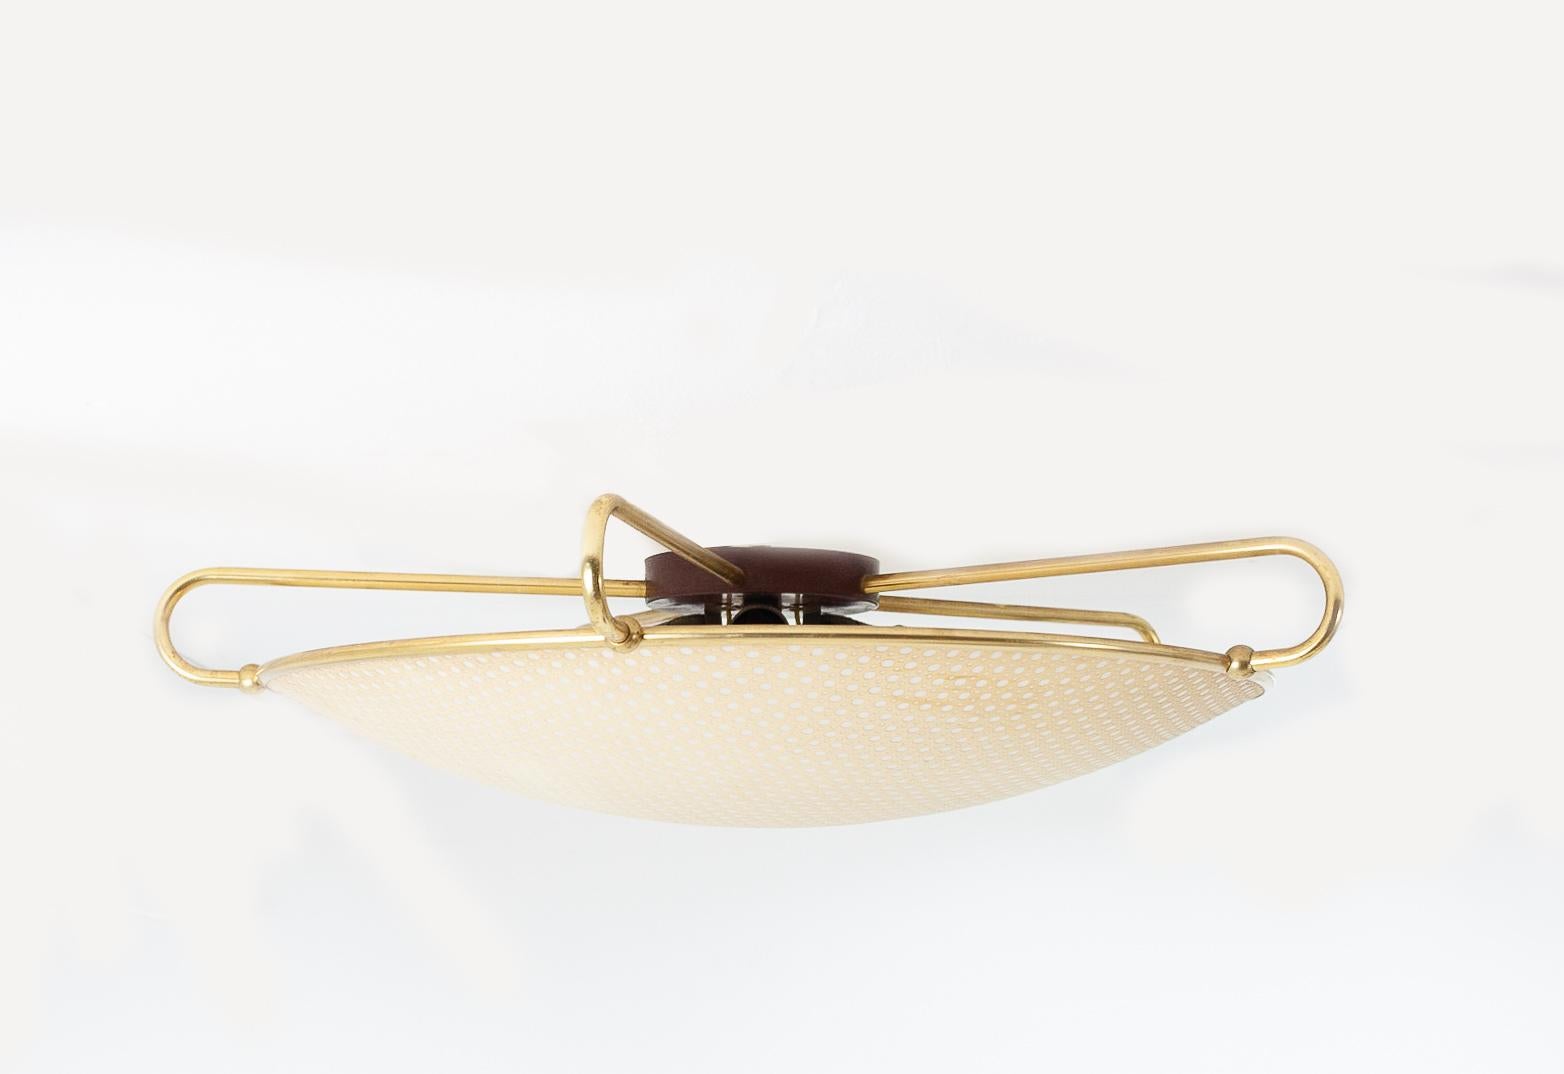 1960s ERCO ceiling light features a bakelite ceiling plate and triple armature, elegantly curved brass arms and a translucent plastic shade. This example is in very nice shape.